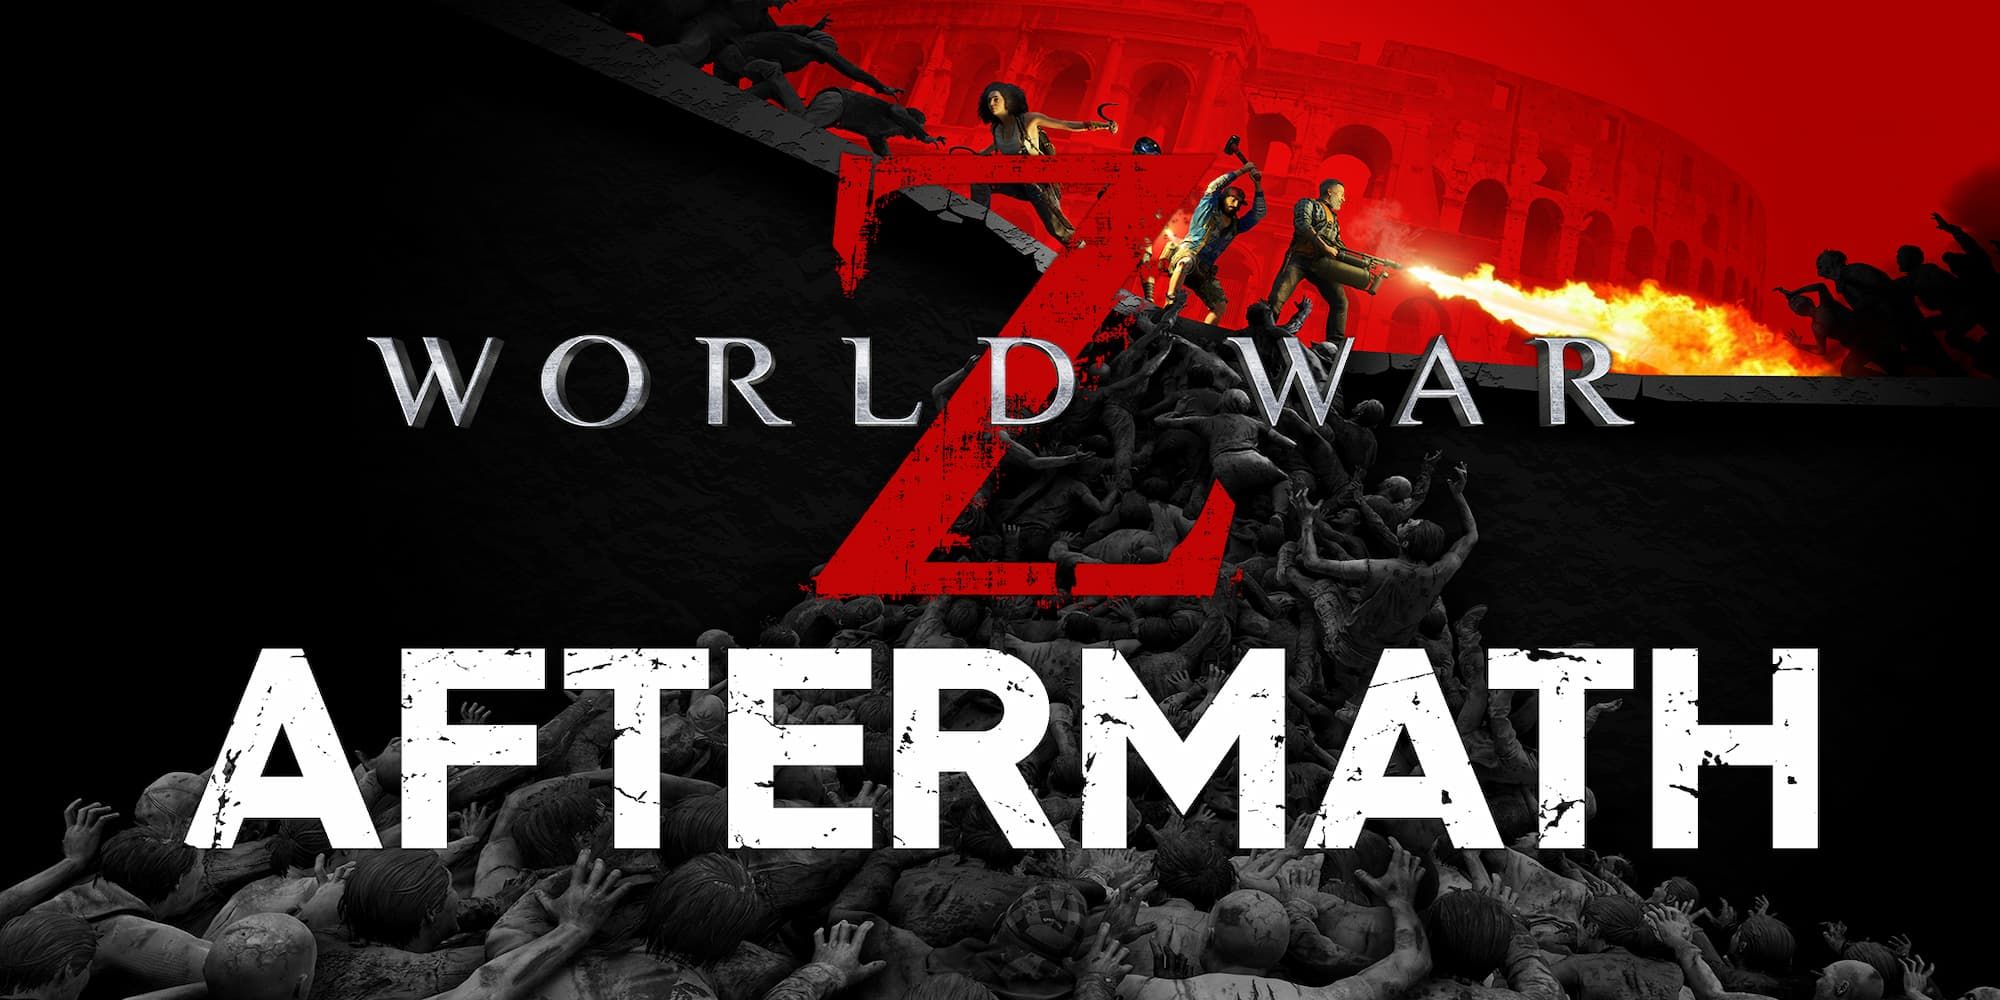 World War Z Is Coming To PlayStation 5 and Xbox Series X